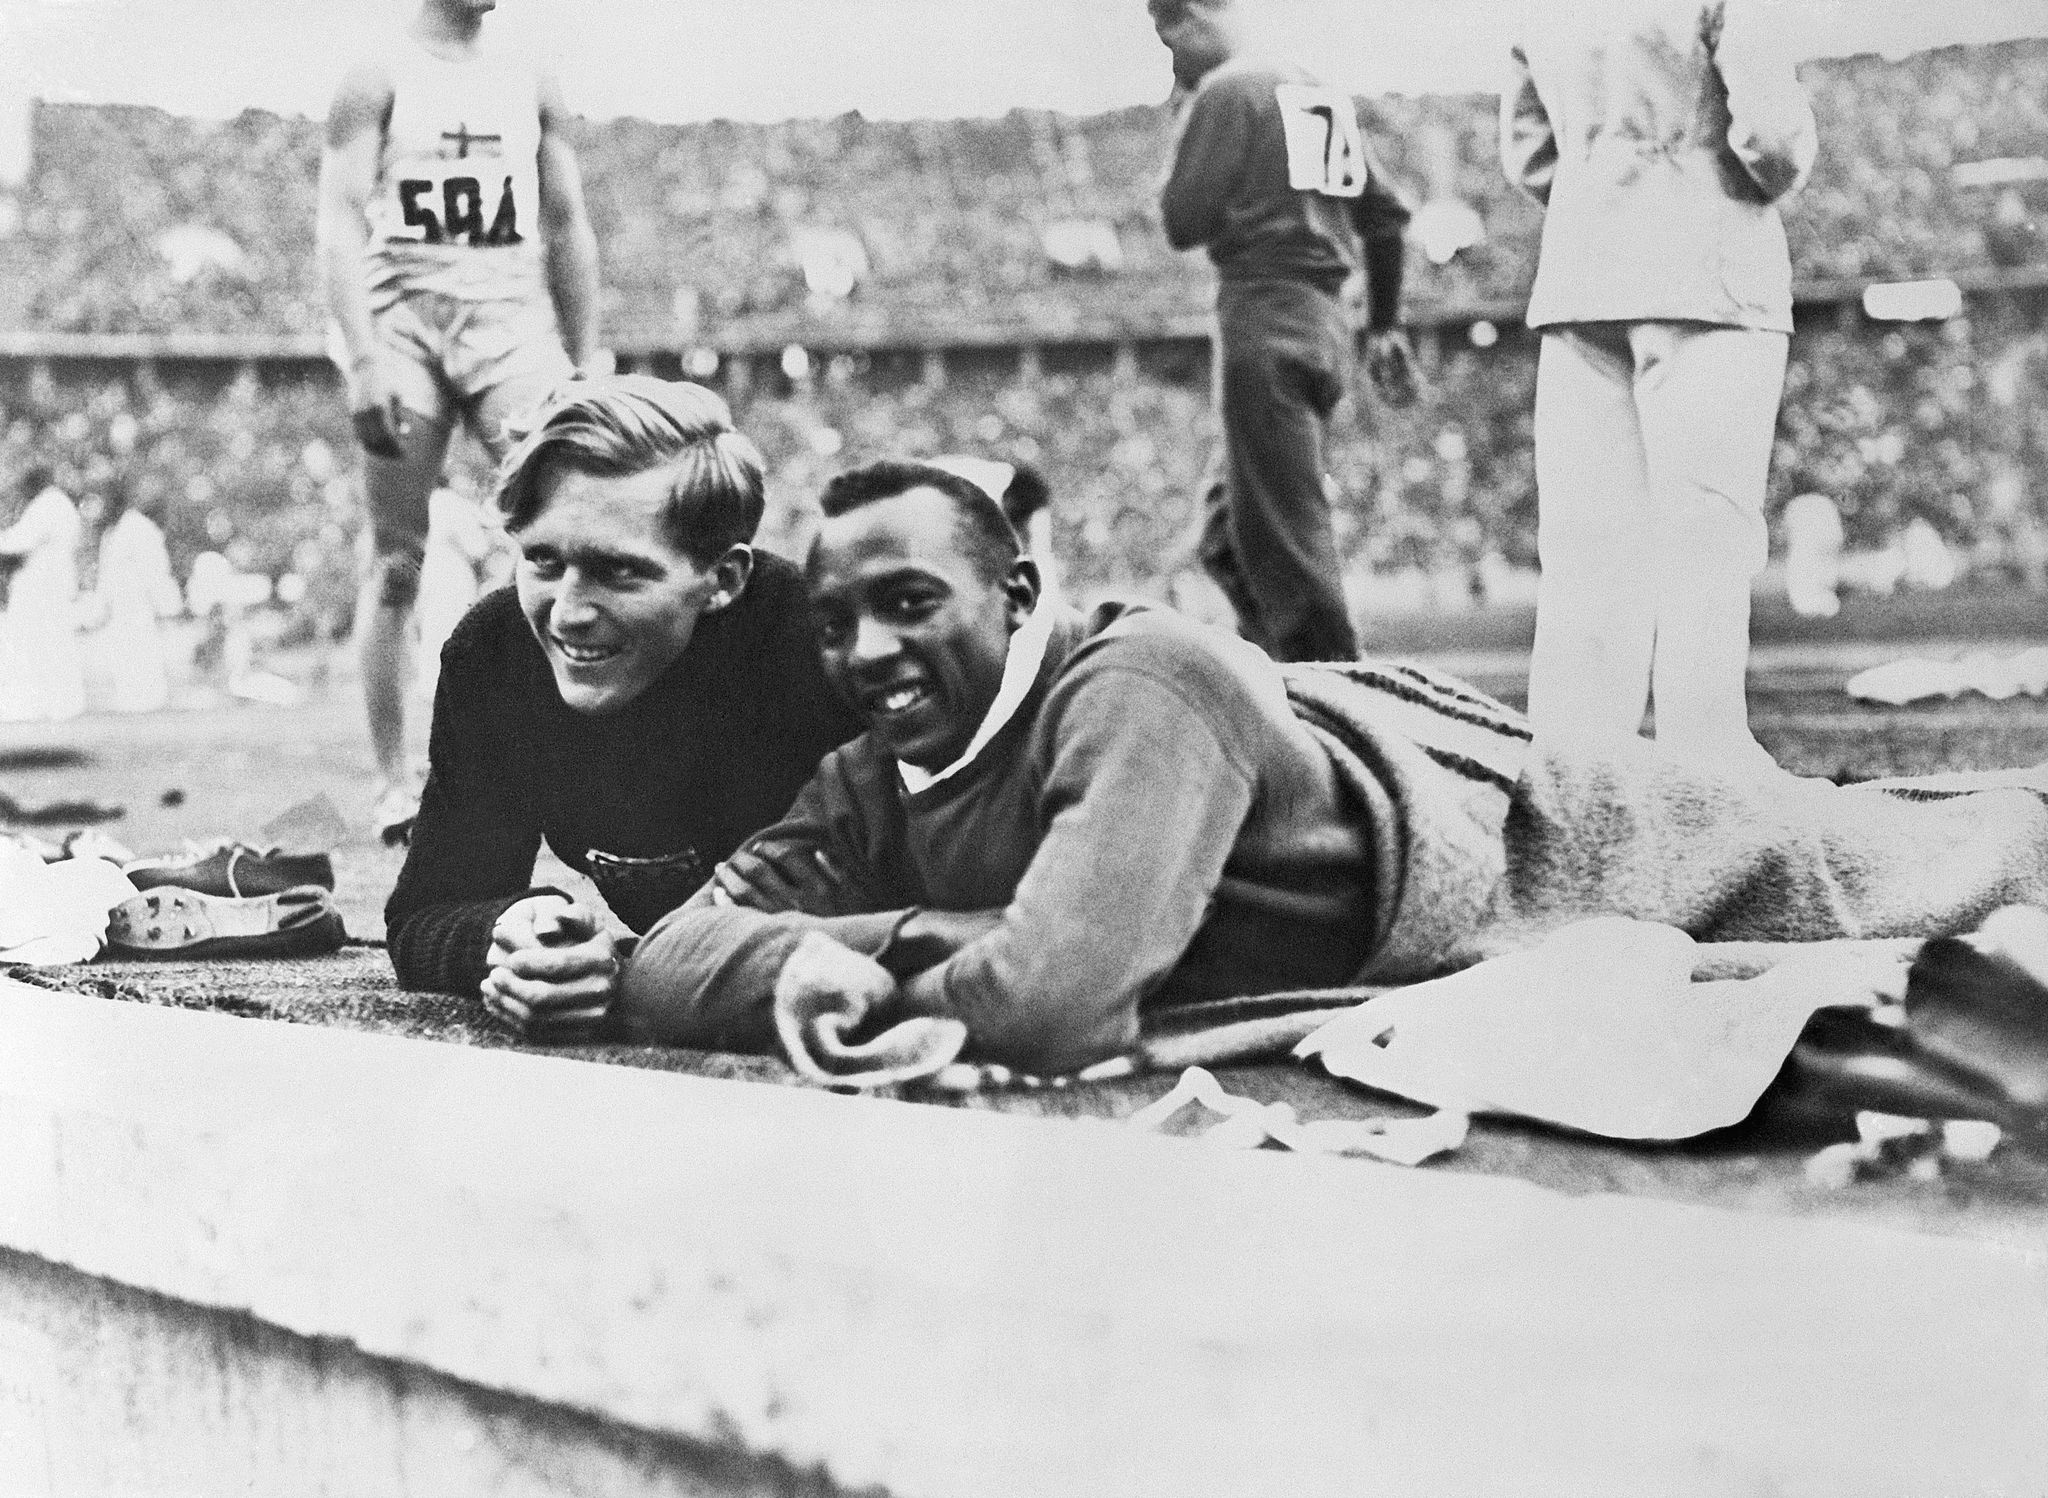 competitors luz long and jesse owens seem very amicable watching contestants in the broad jump owens, representing the us, took the gold medal, while long, representing germany, took silver in the broad jump